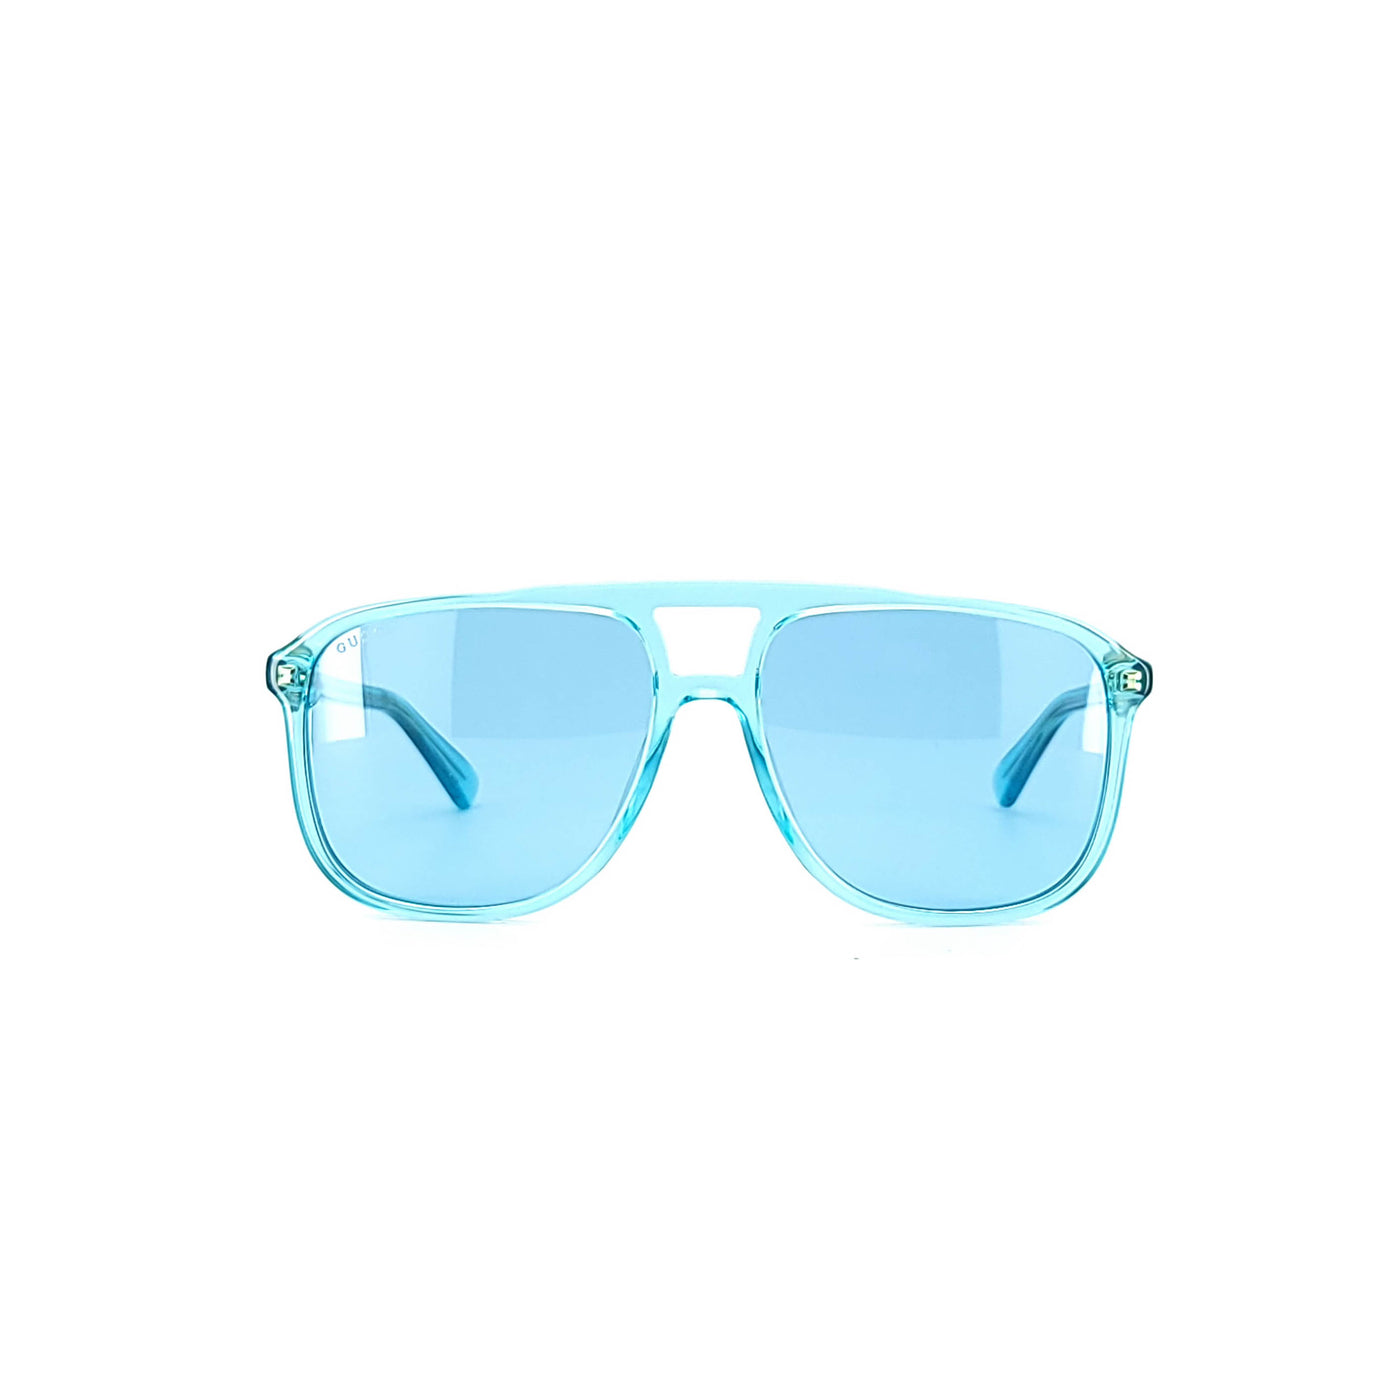 Gucci GG 0262S/003 | Sunglasses - Vision Express Optical Philippines